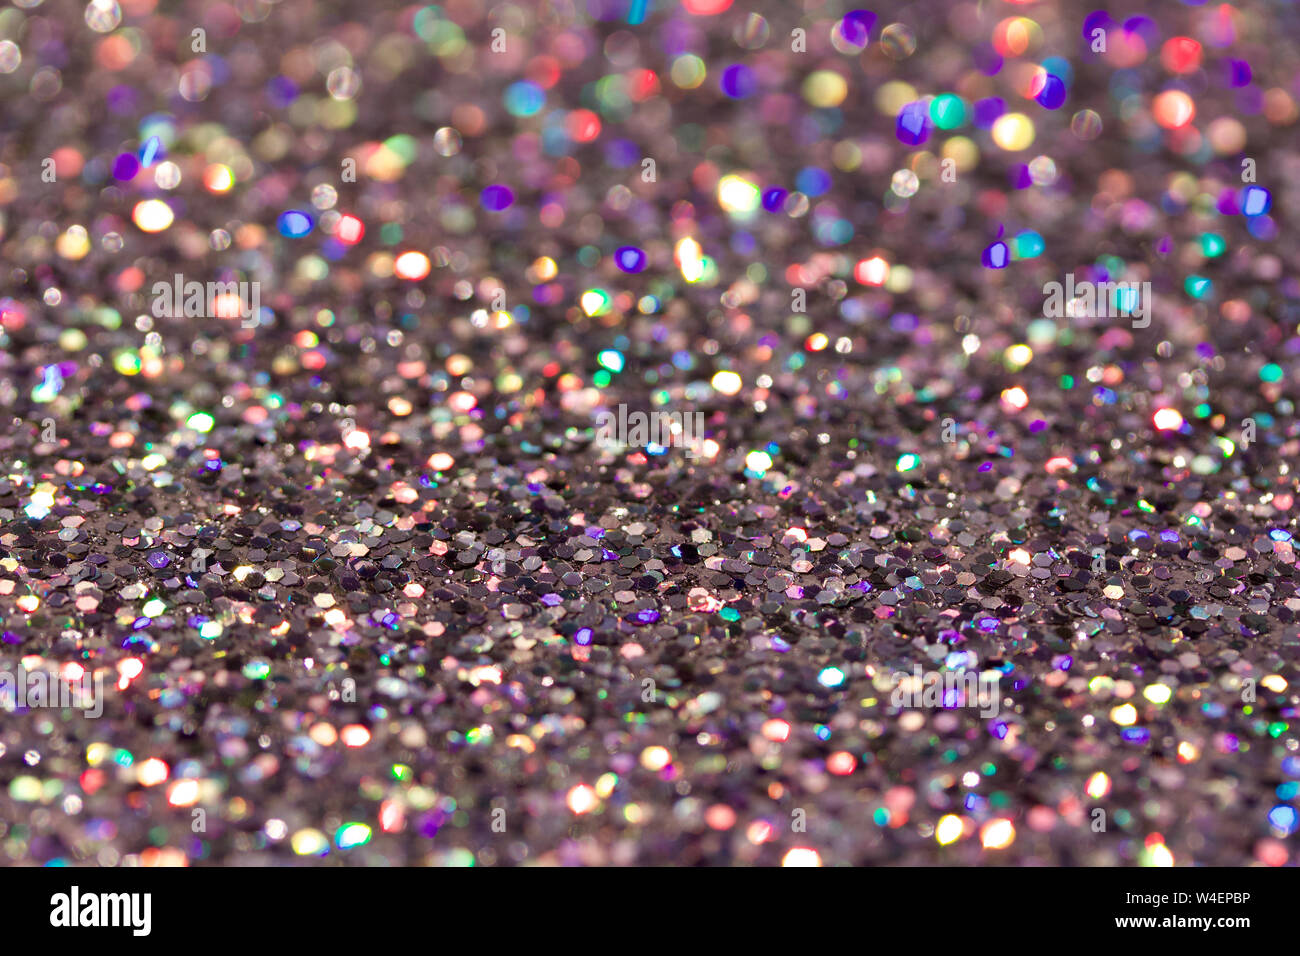 Sparkling silver glitter textured background Stock Photo by ©belchonock  126969284